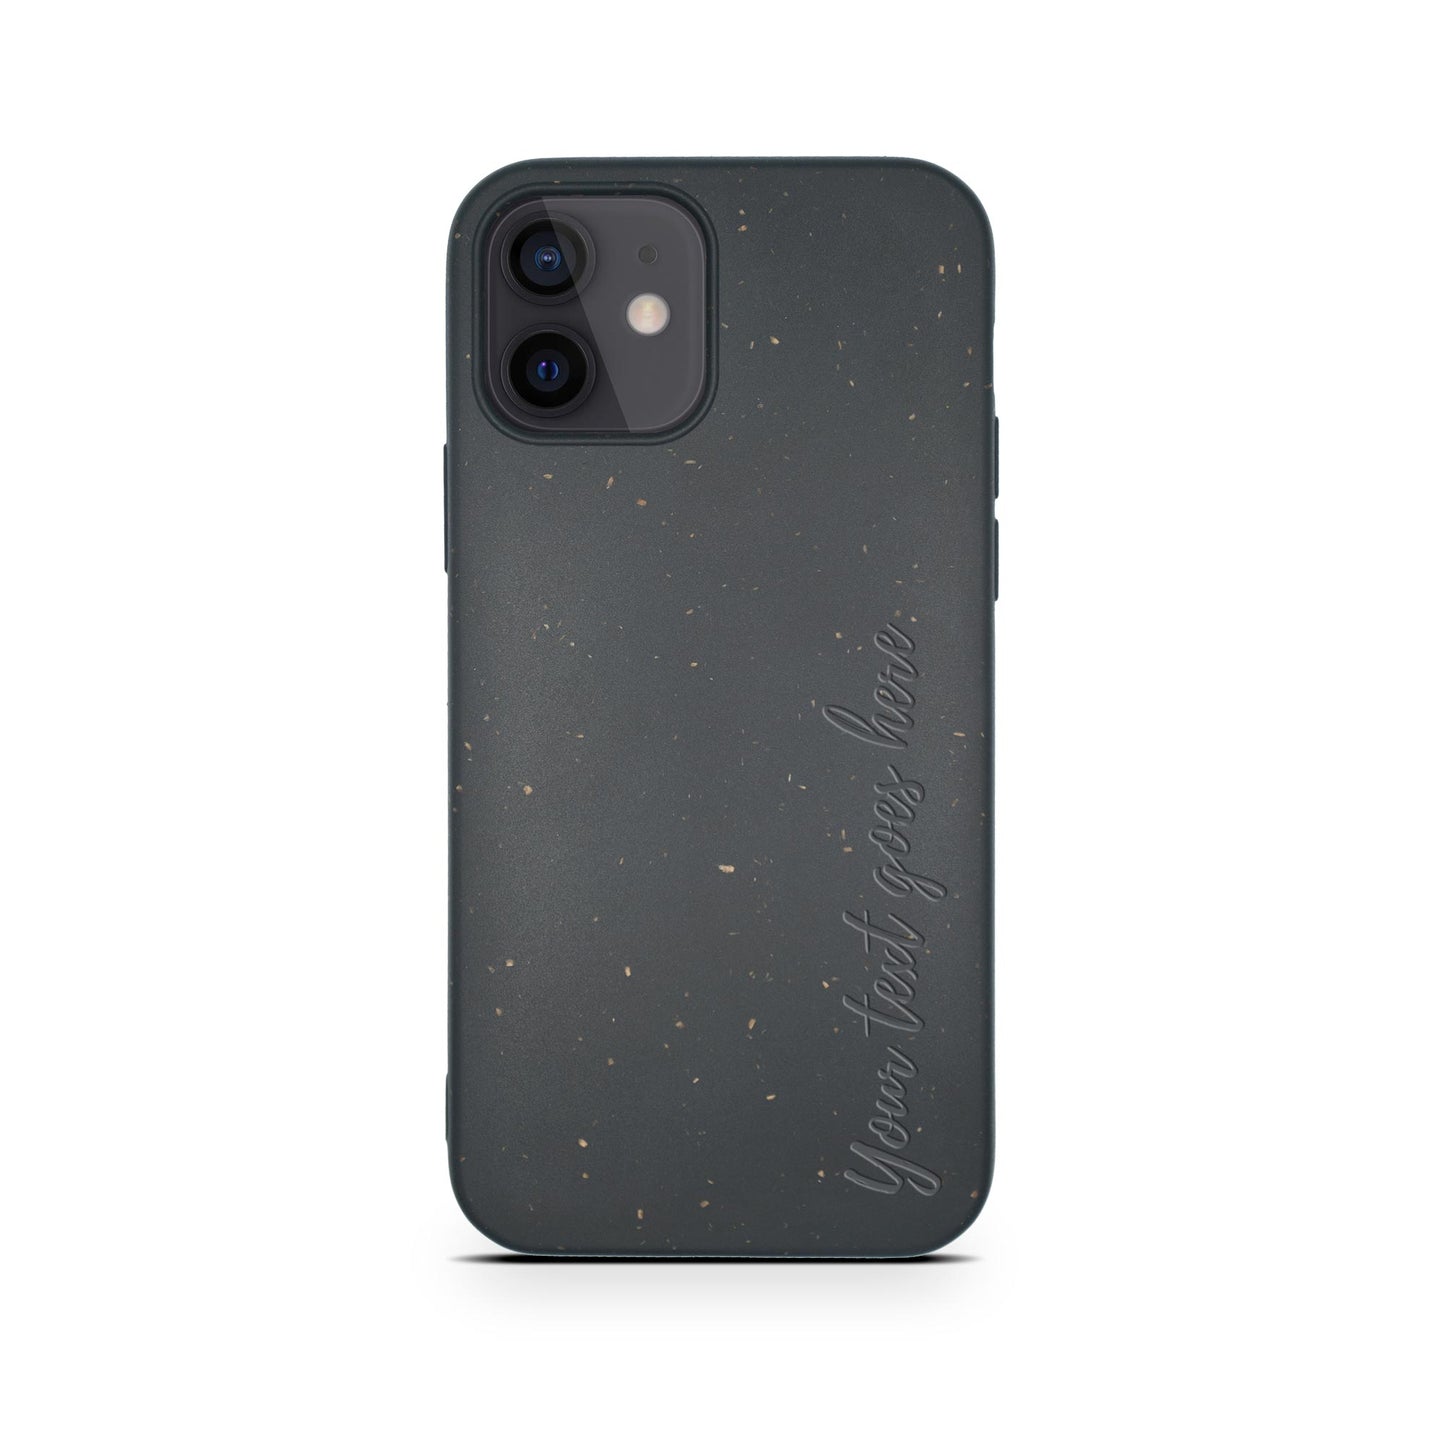 Tan Lily's biodegradable personalized iPhone case in black with gold speckles and cursive text "Your best life" on a white background is eco-friendly.